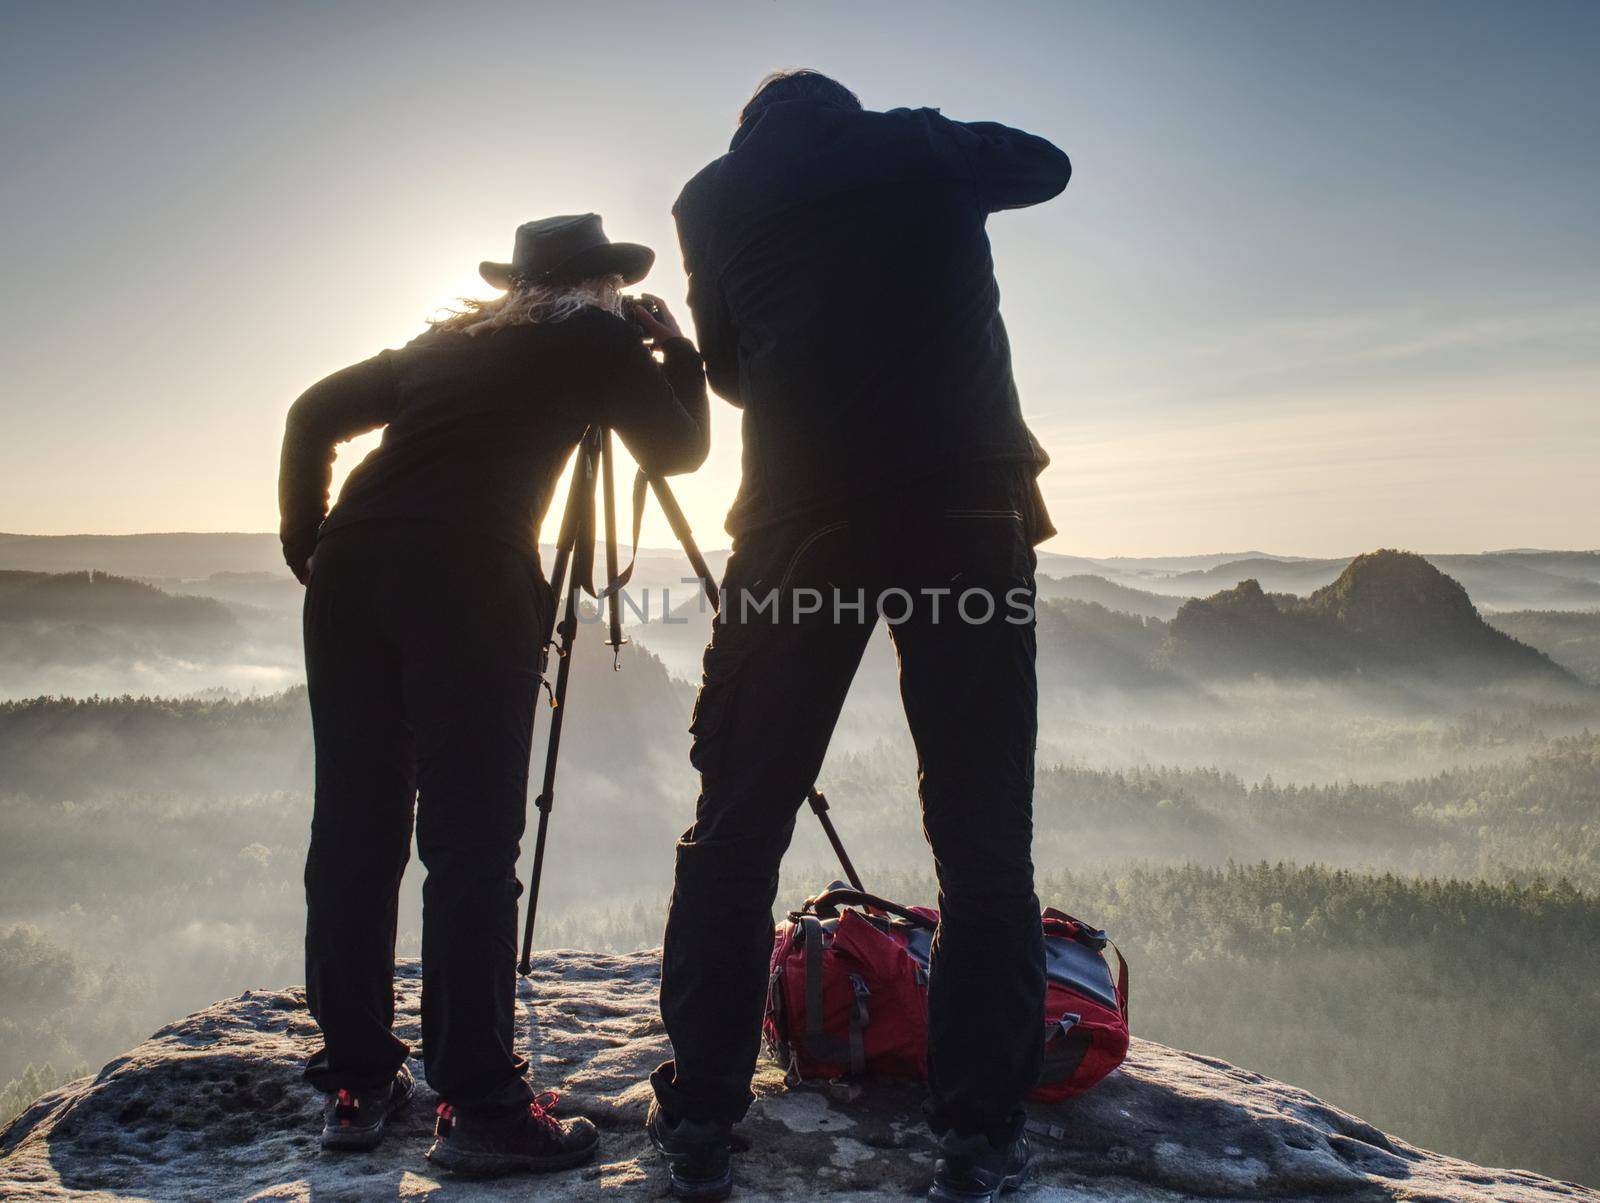 Two photographers discuss and share my experiences. Artists make amazing photos on a ledge above the daybreak pure nature.